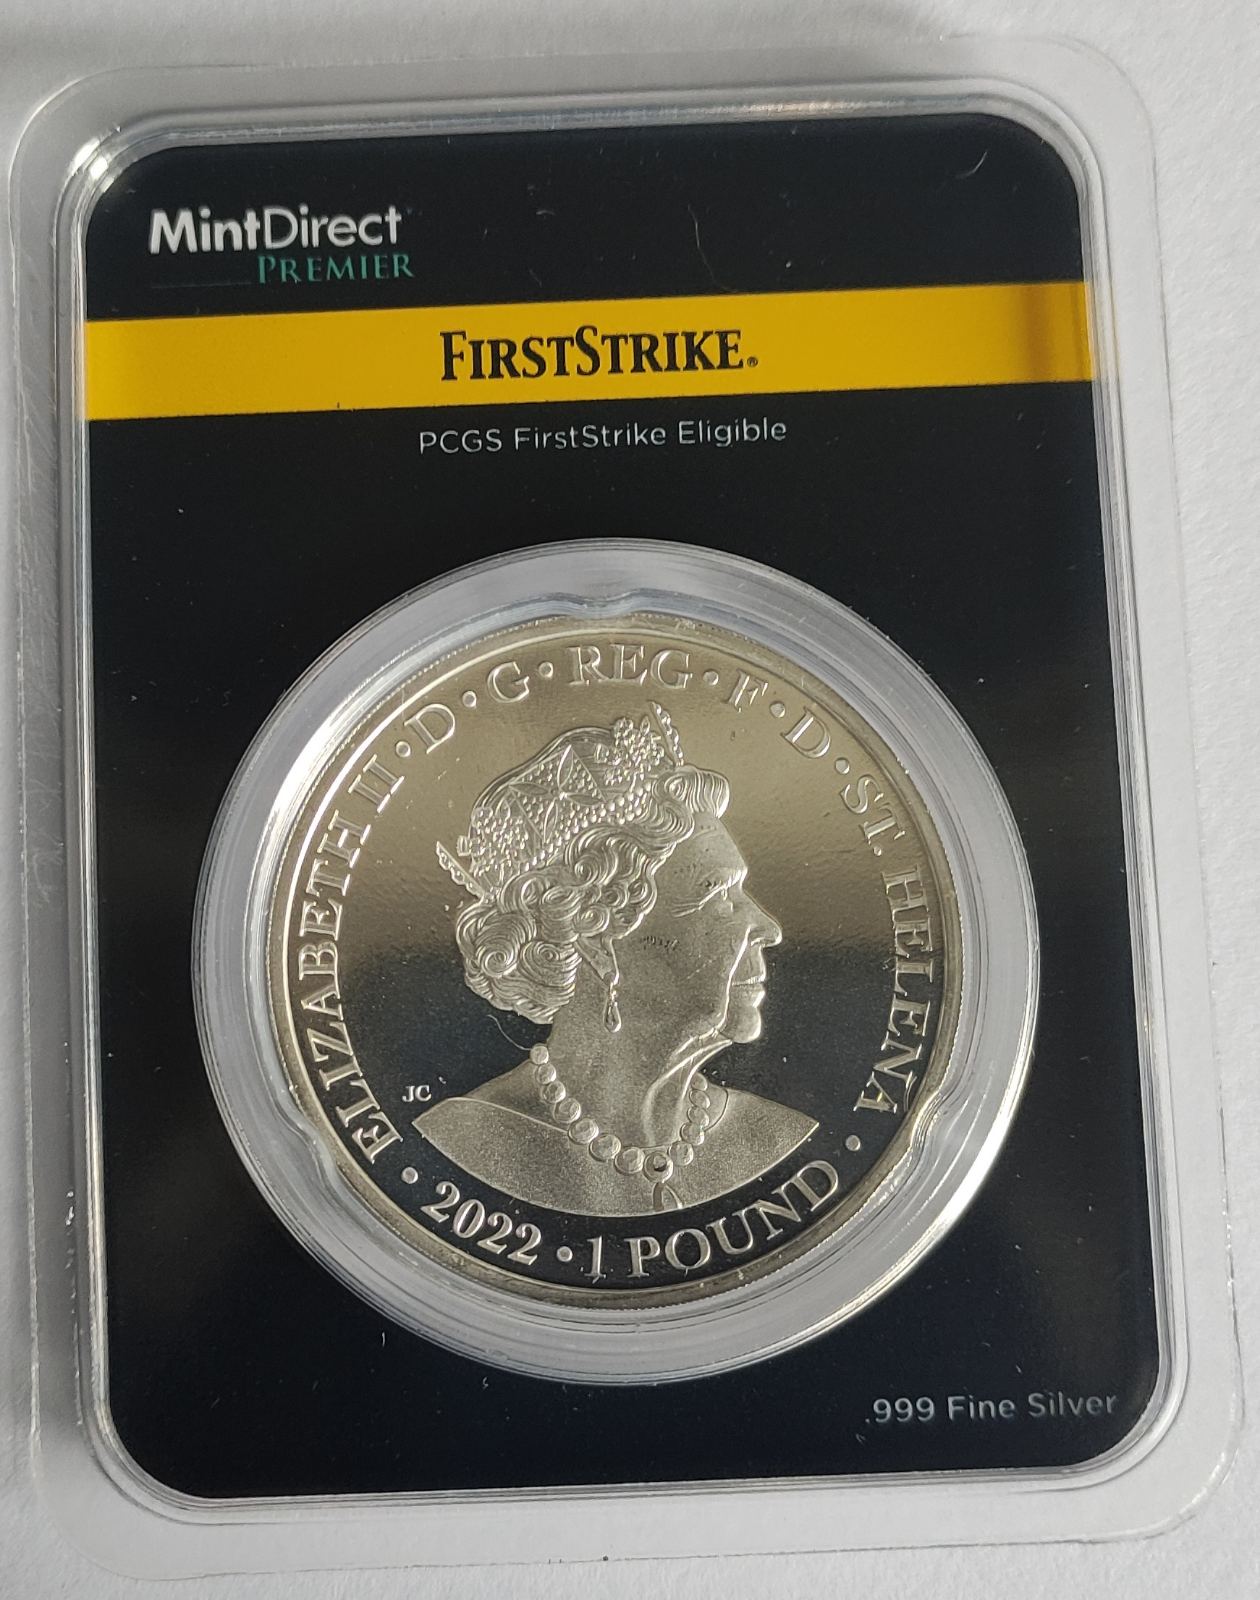 2022 St. Helena Hera and the Peacock 1 oz Silver Coin in MintDirect Premier Packaging + PCGS FirstStrike Eligible